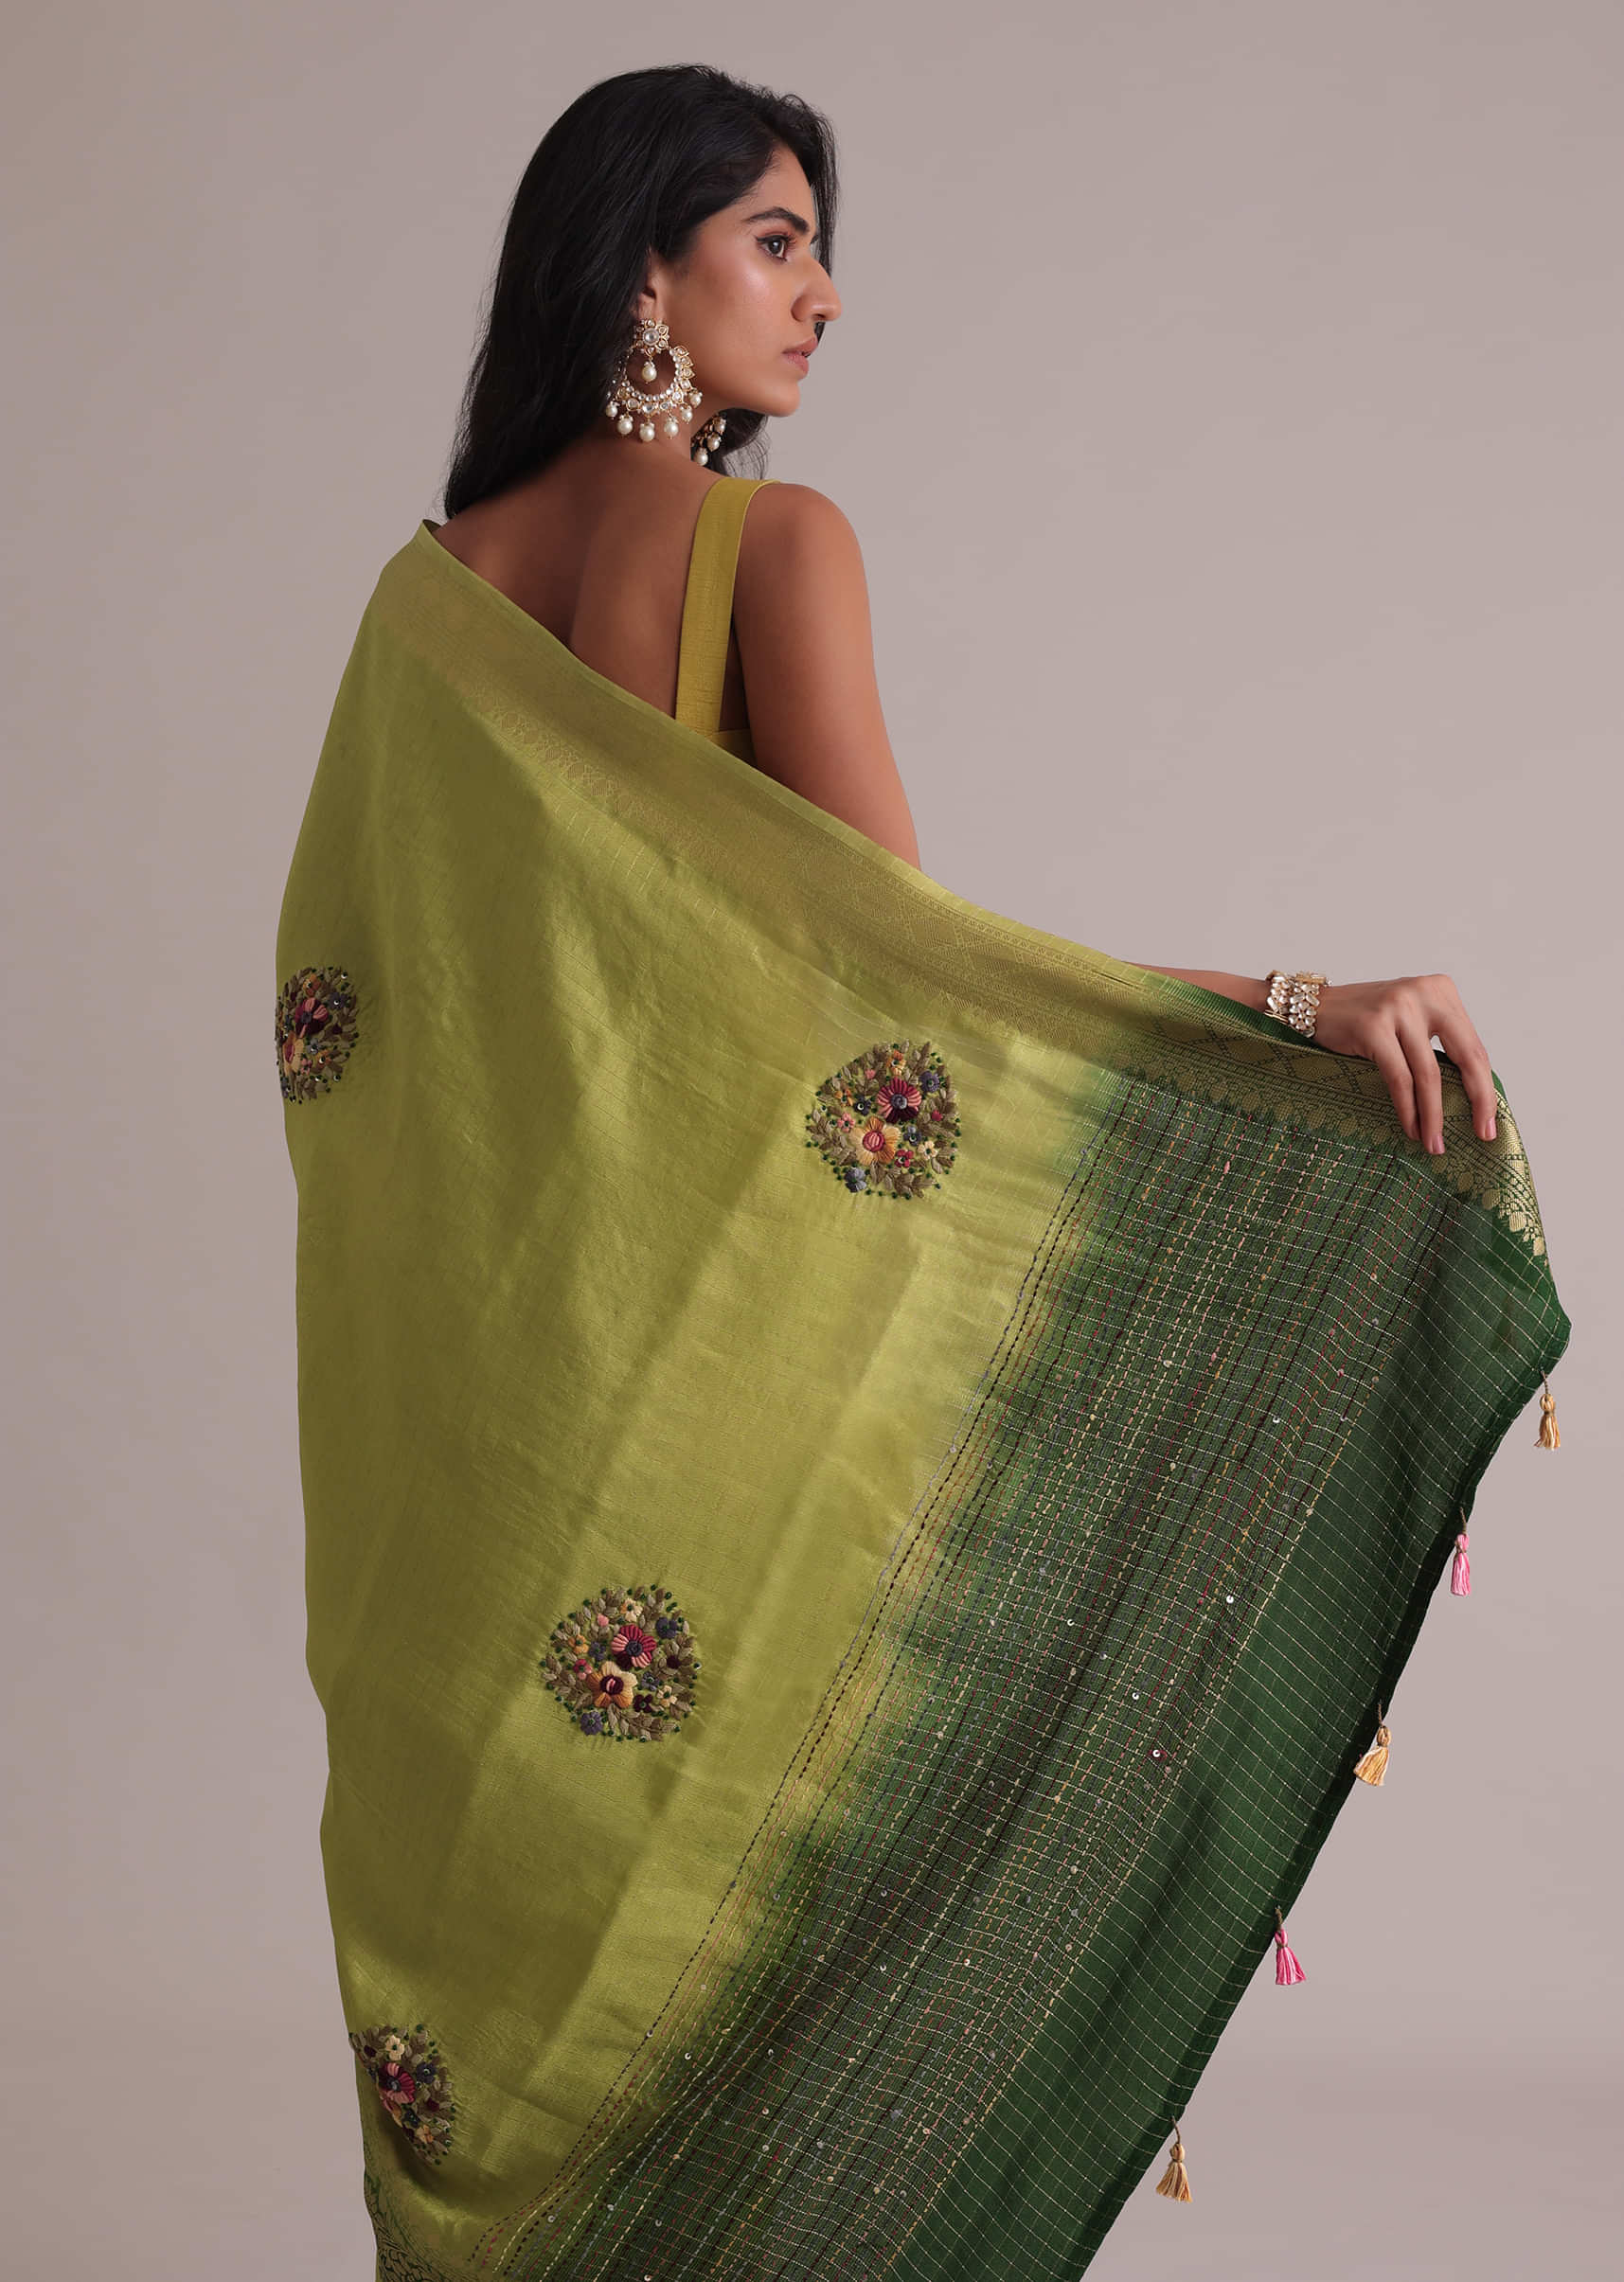 Lemon And Dark Green Ombre Saree In Georgette Tussar With Brocade, Zari, And Resham 3D Bud Embroidery